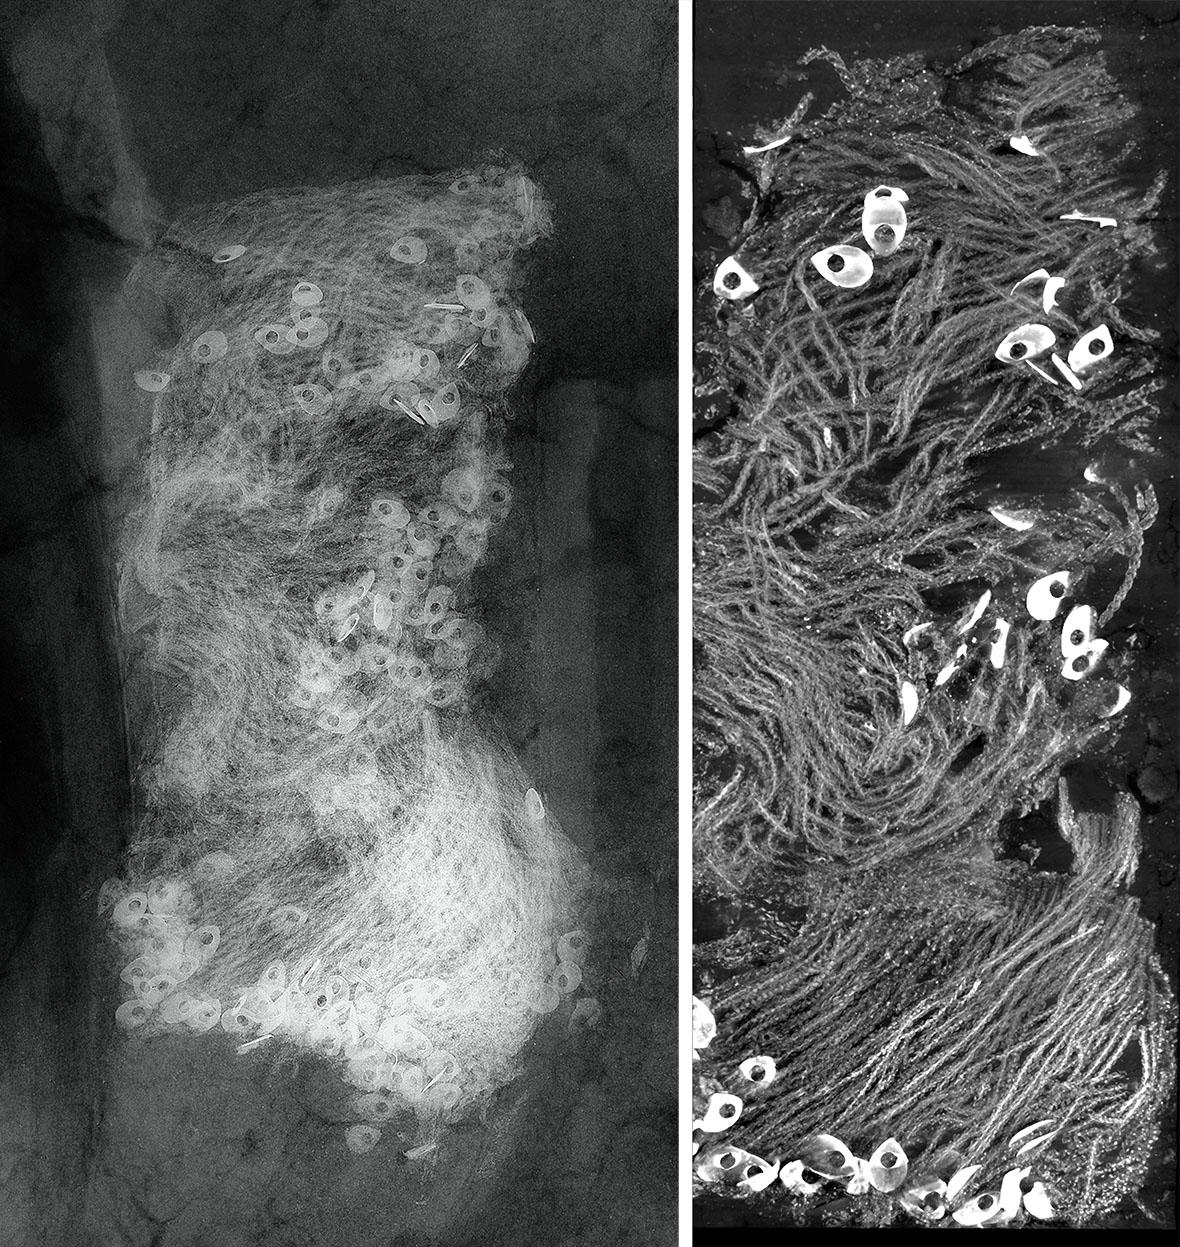 X-ray (left) and Micro CT imaging (right) of silver fringe found with William West. 